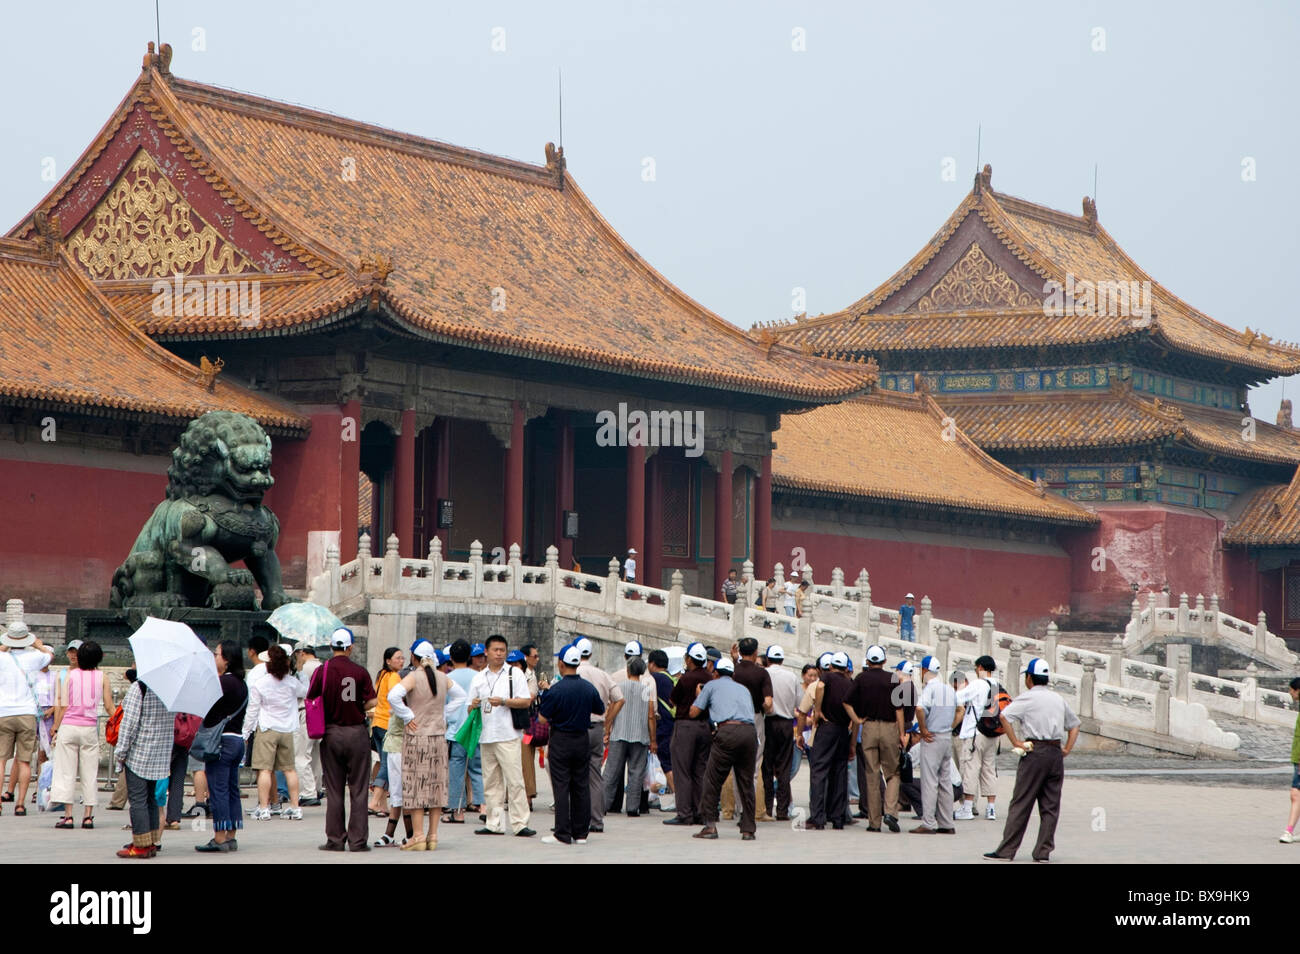 Crowds of tourist stand waiting to enter the Taihemen Gate on their way into the Forbidden City, Beijing, China. Stock Photo